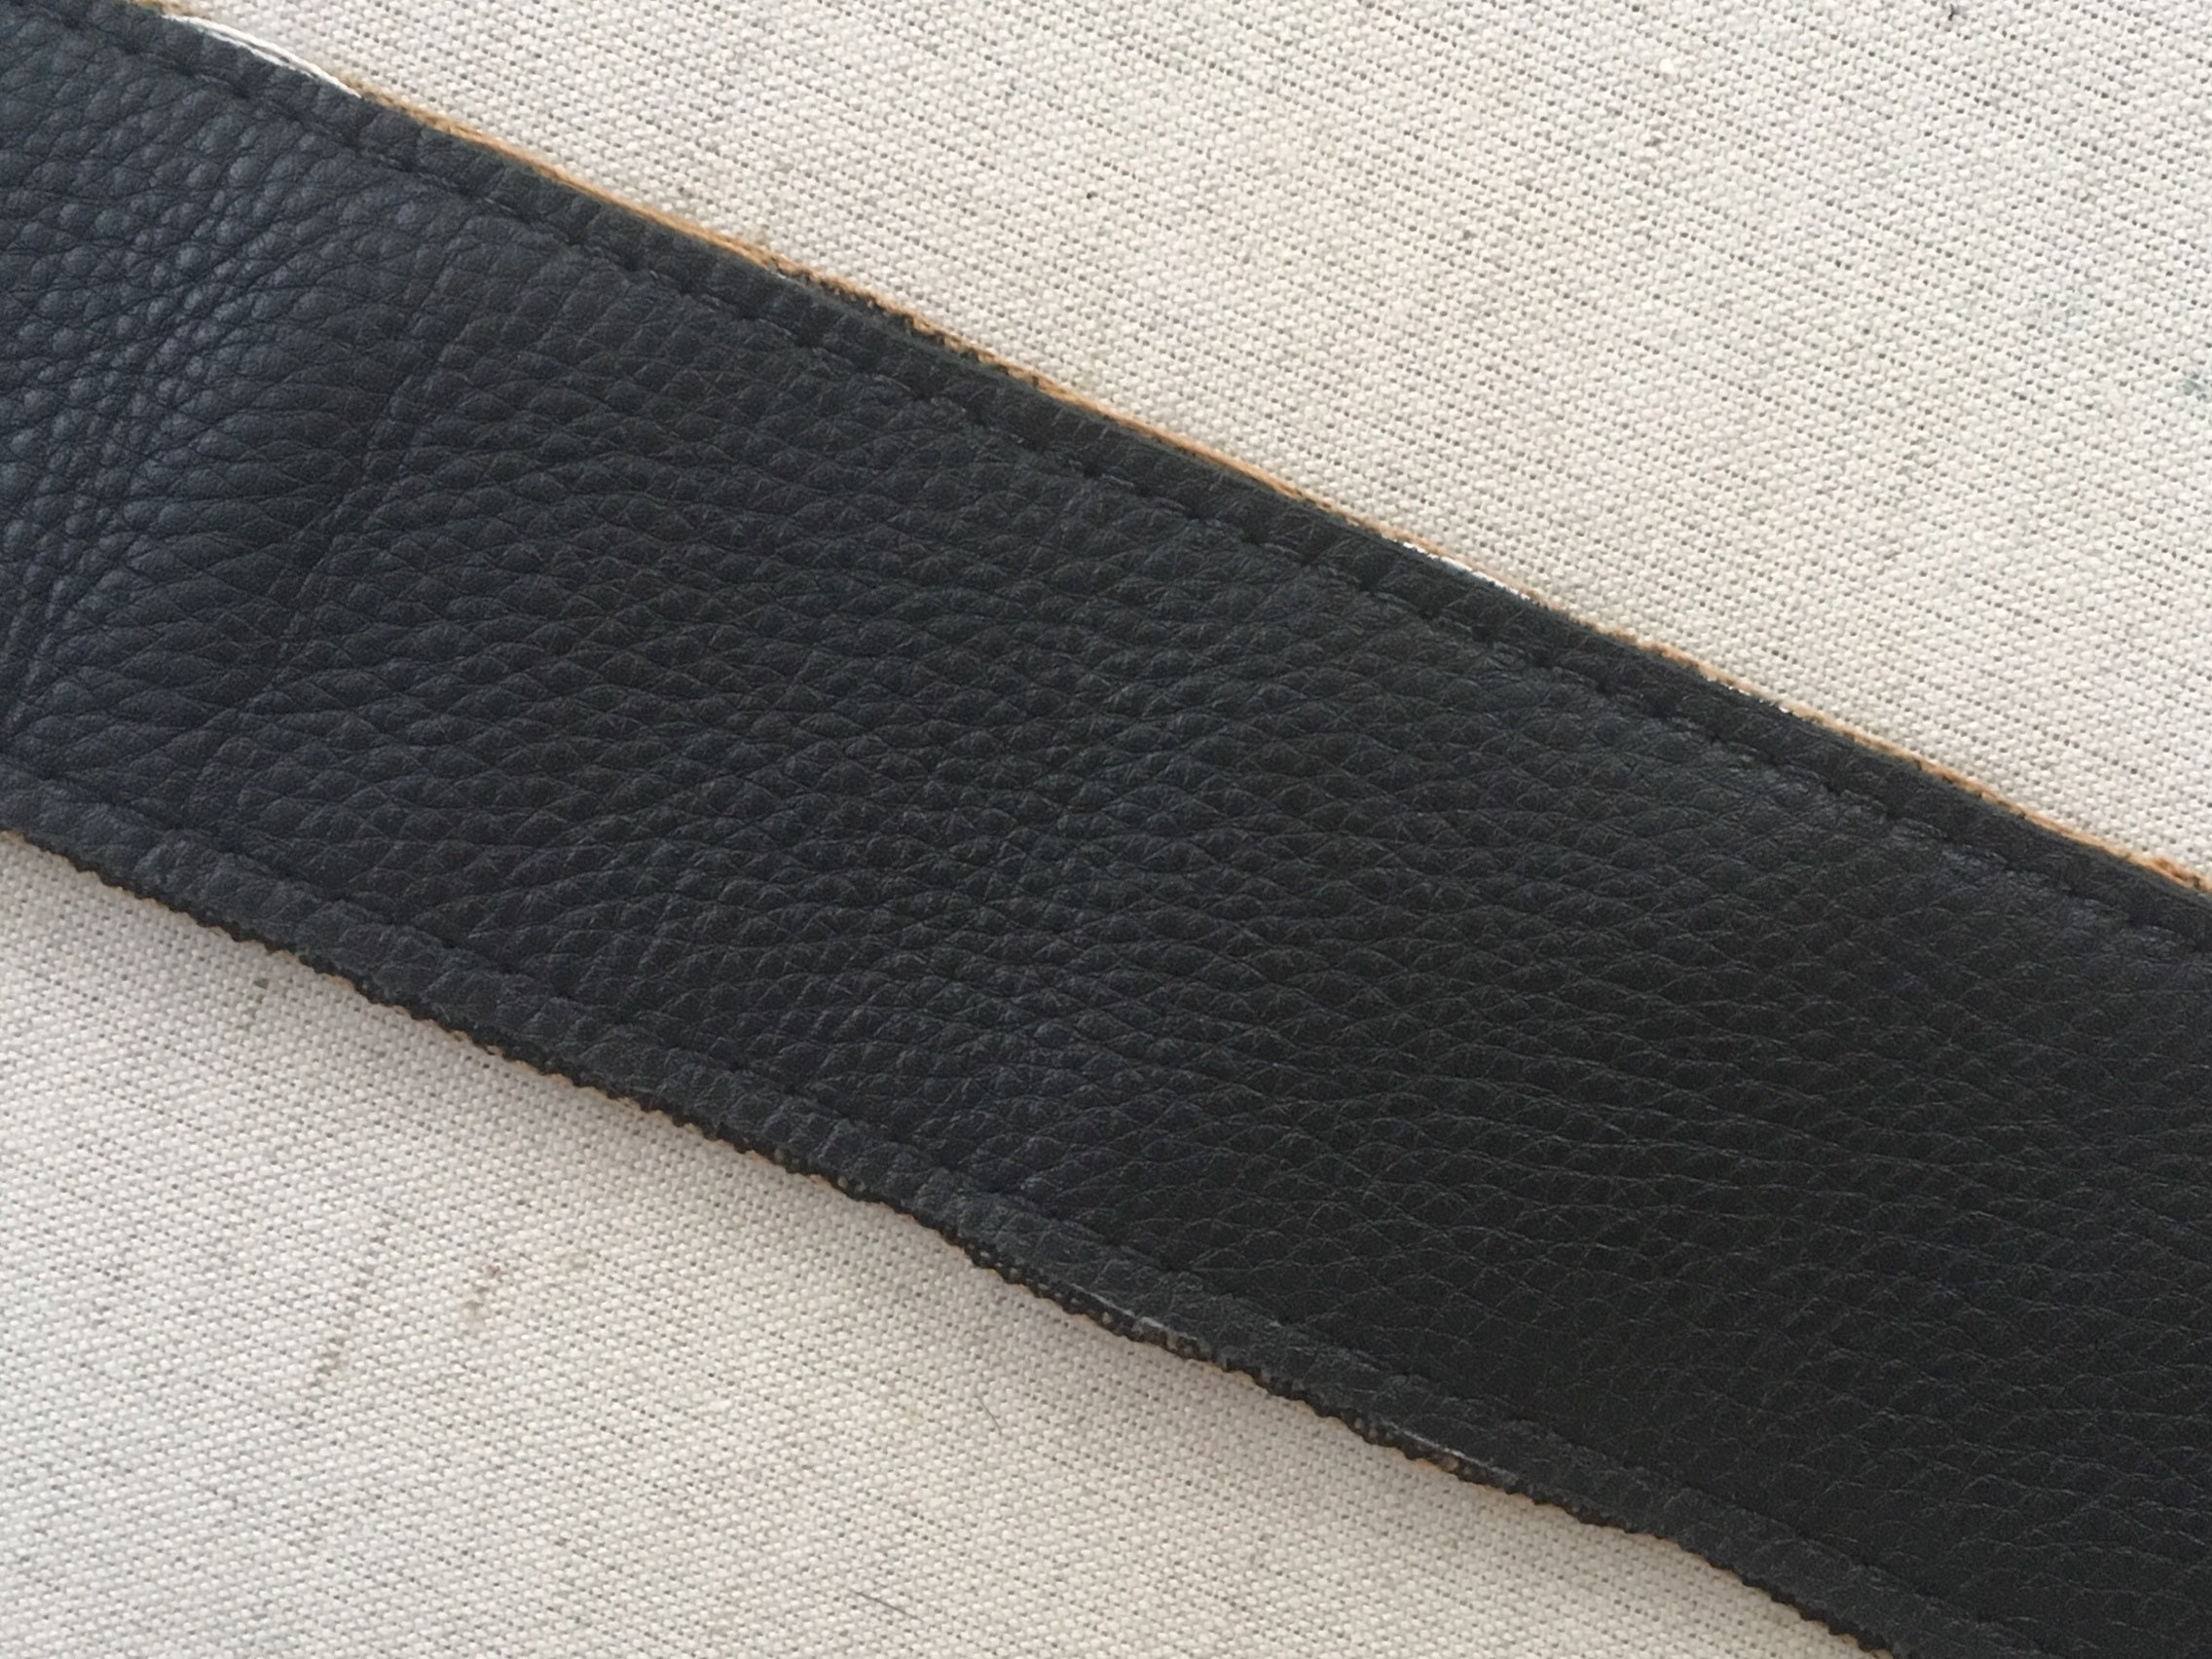 Vintage Levy's Guitar Strap Distressed Leather Ends Yellow Black White ...